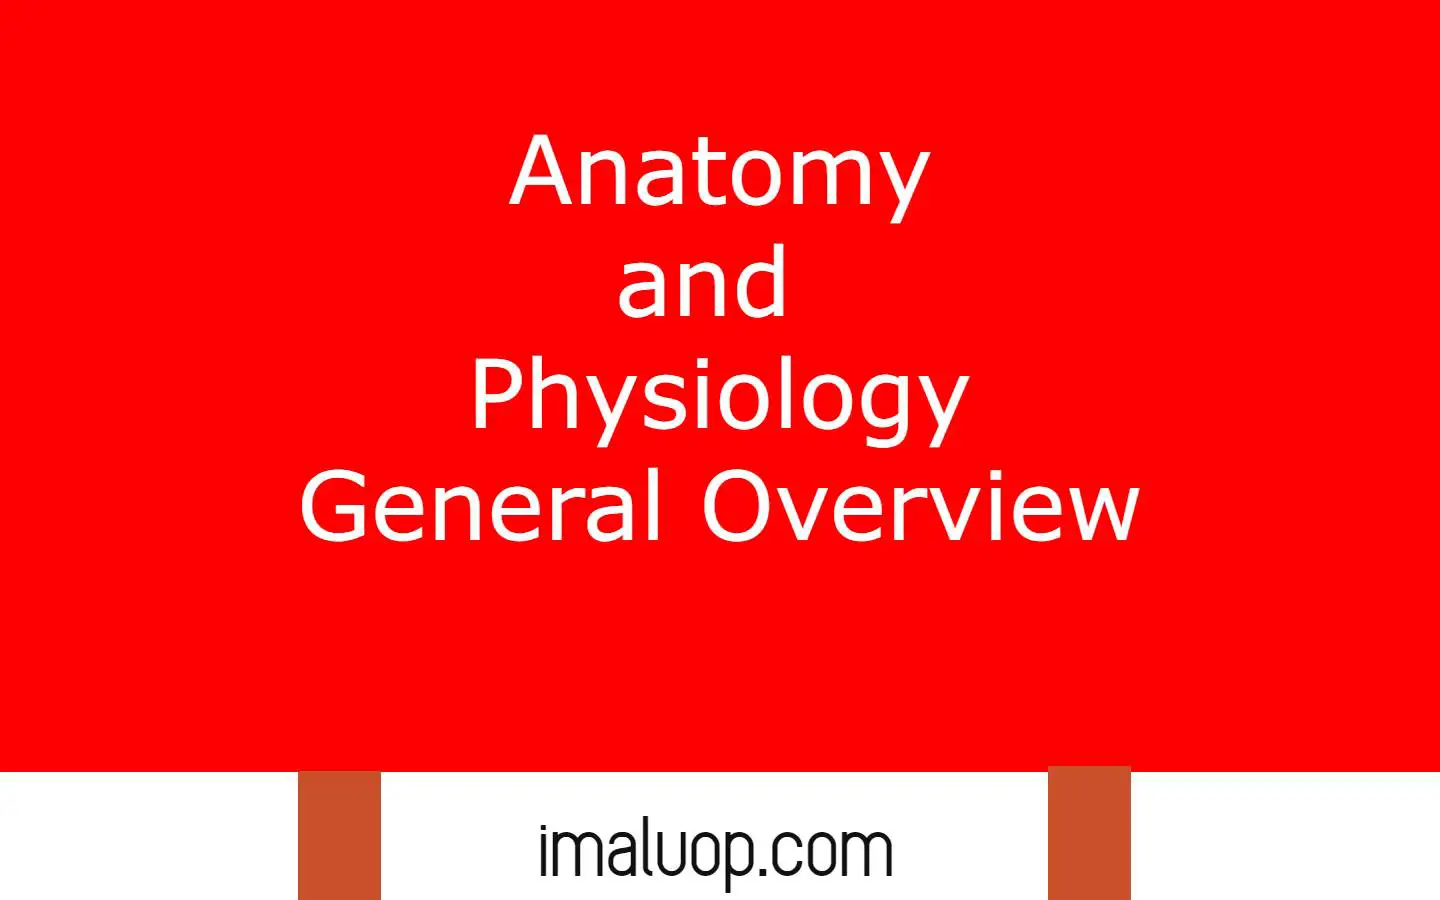 Anatomy and Physiology General Overview